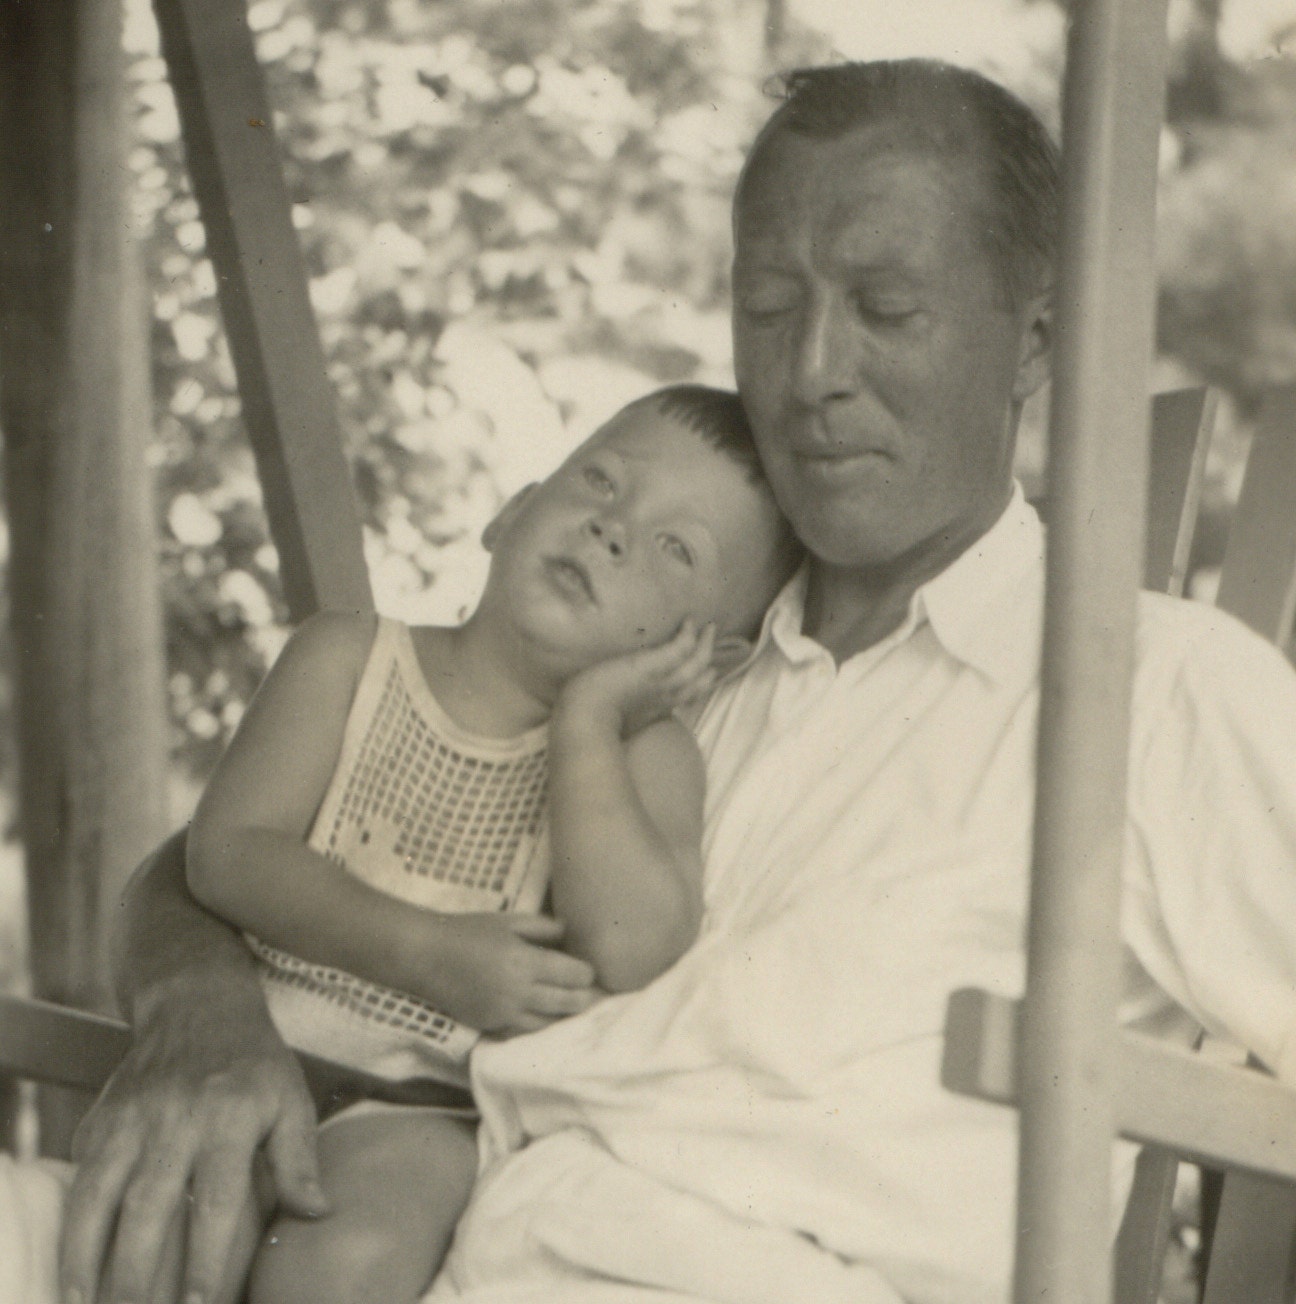 Vintage Sepia Photo of Sleepy Father Dressed in White with His Toddler Son in Lap Summer 1933